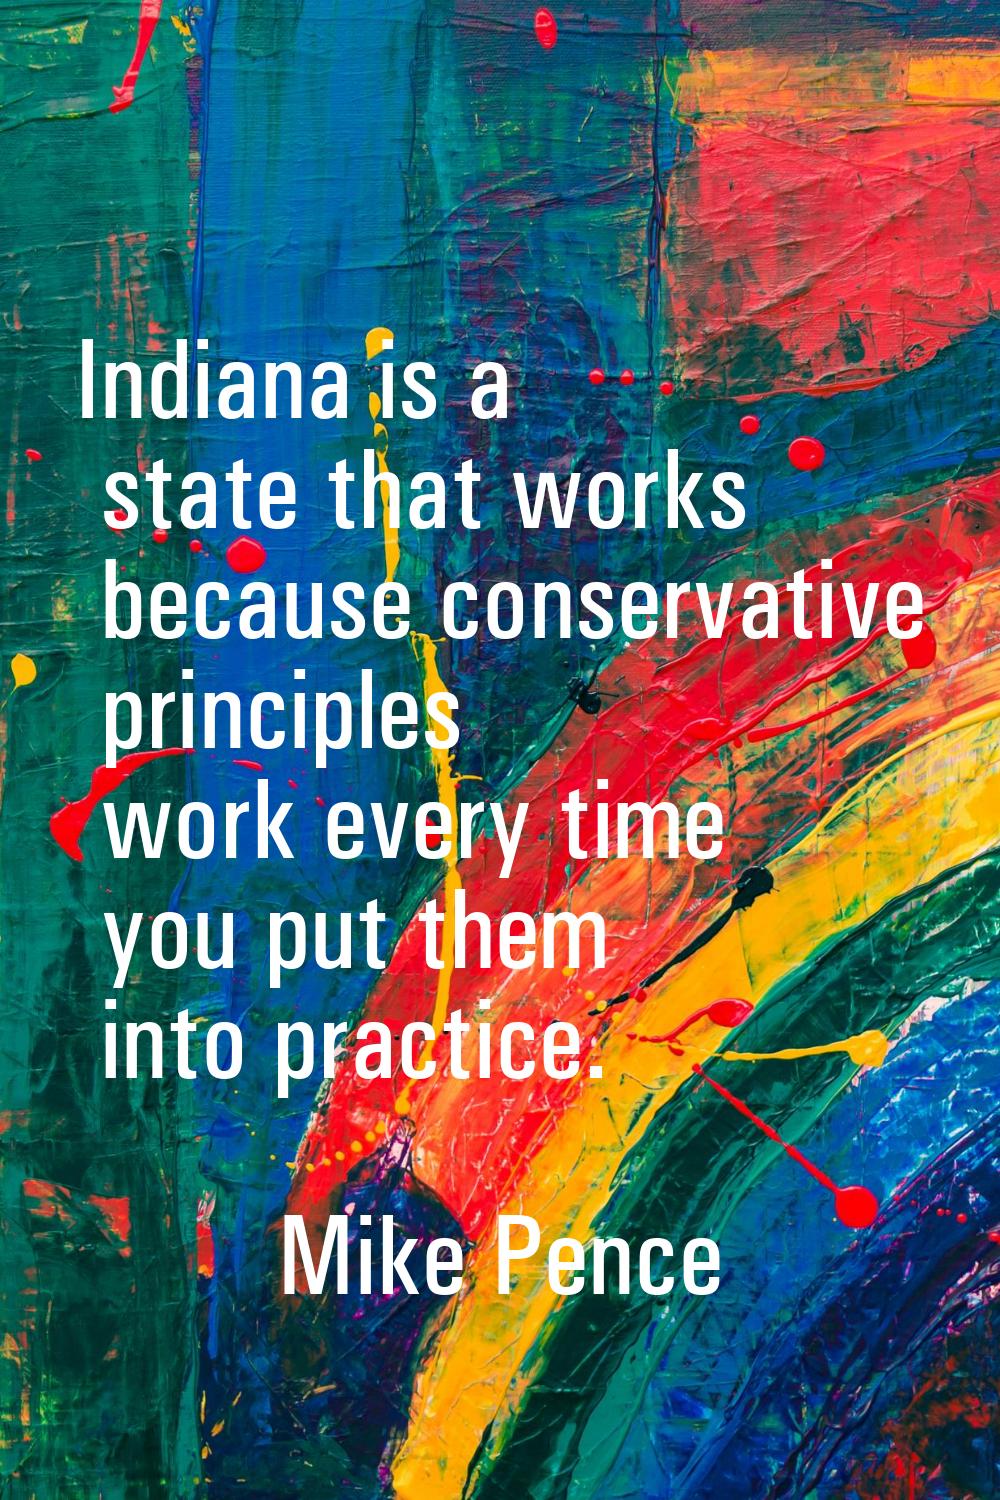 Indiana is a state that works because conservative principles work every time you put them into pra